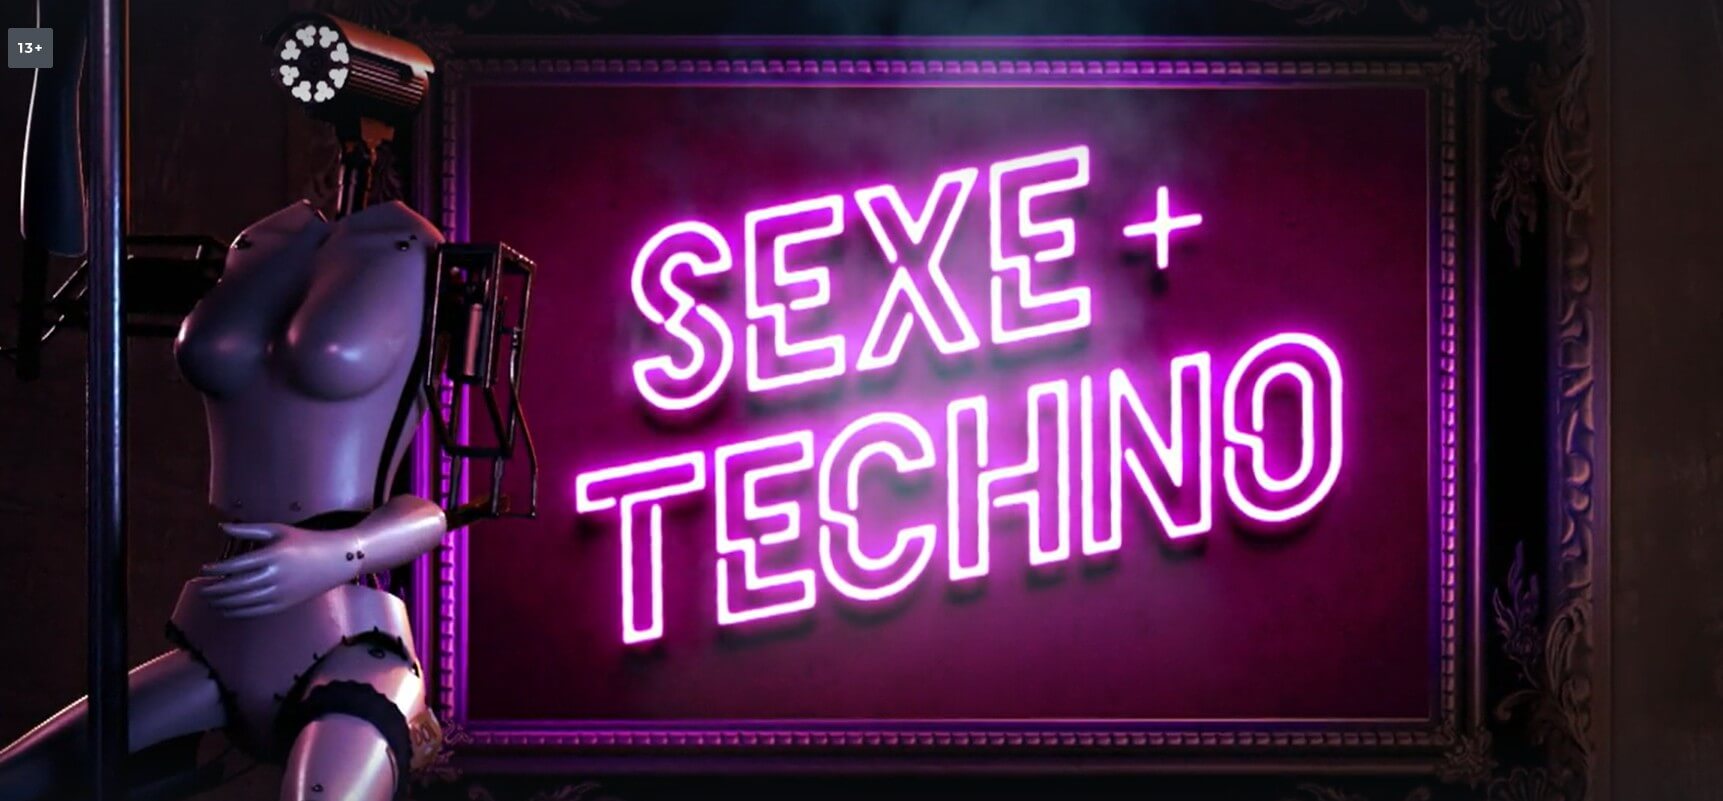 Robotic female figure dances around a pole in opening from French Canadian sex tech documentary TV series Sexe+Techno.